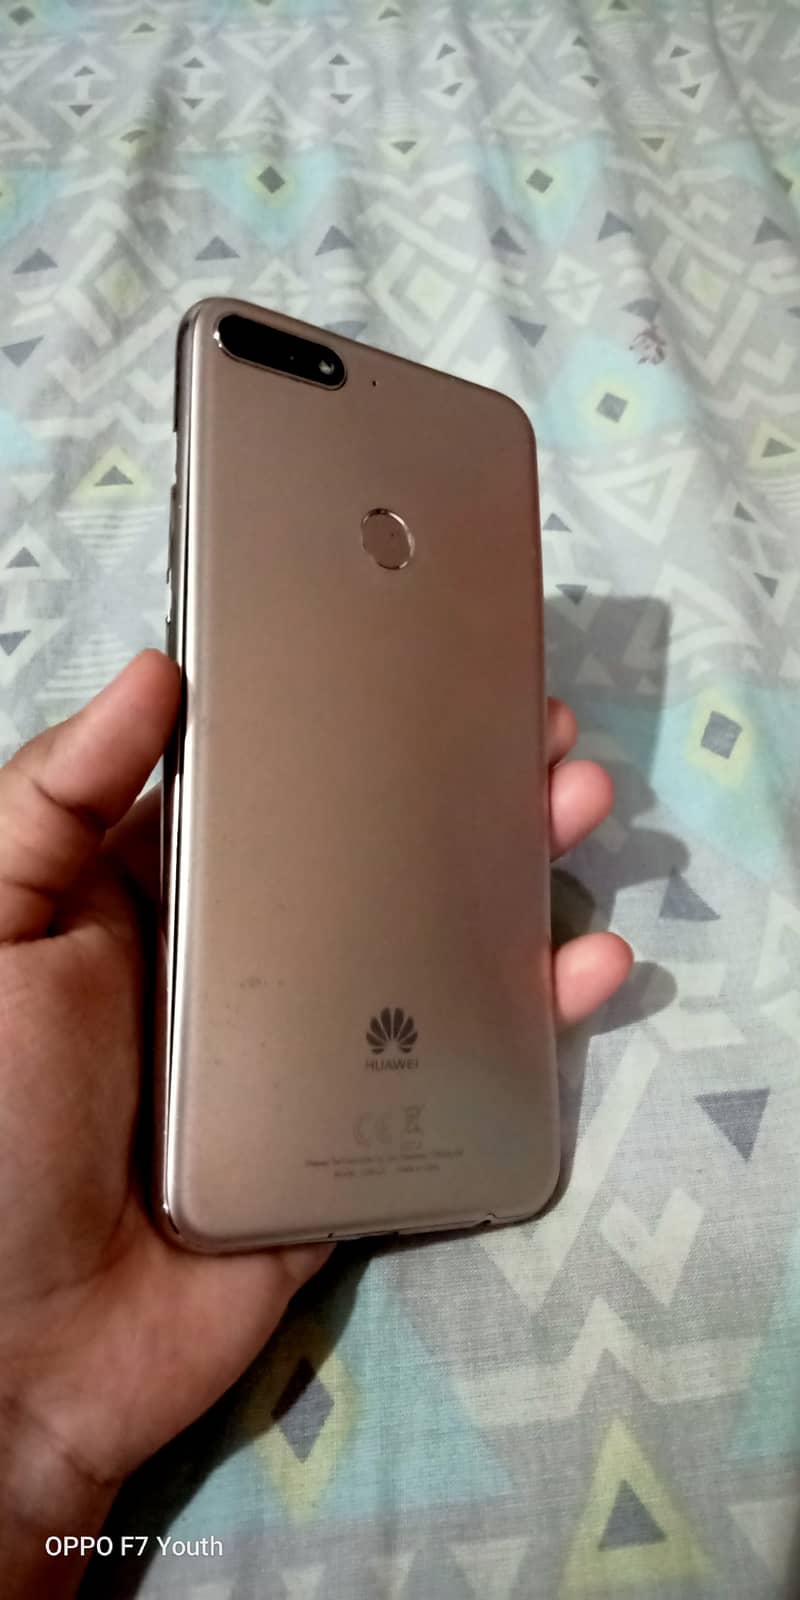 HUAWEI Y7 PRIME FOR SALE. 4